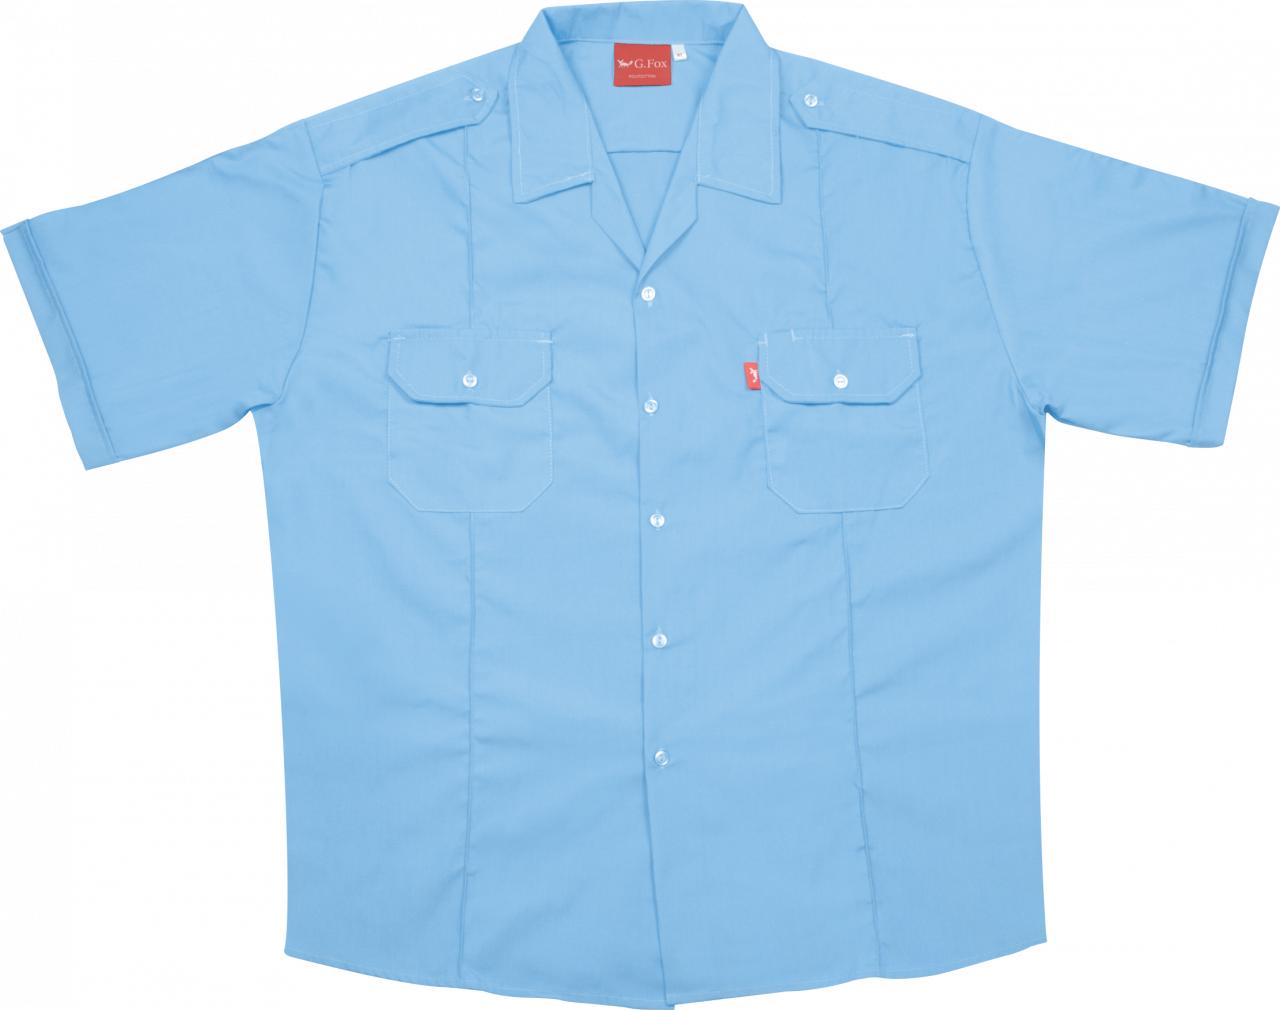 Security Shirt Pilot Short Sleeves. G/N 606. Avail in Maz Blue,